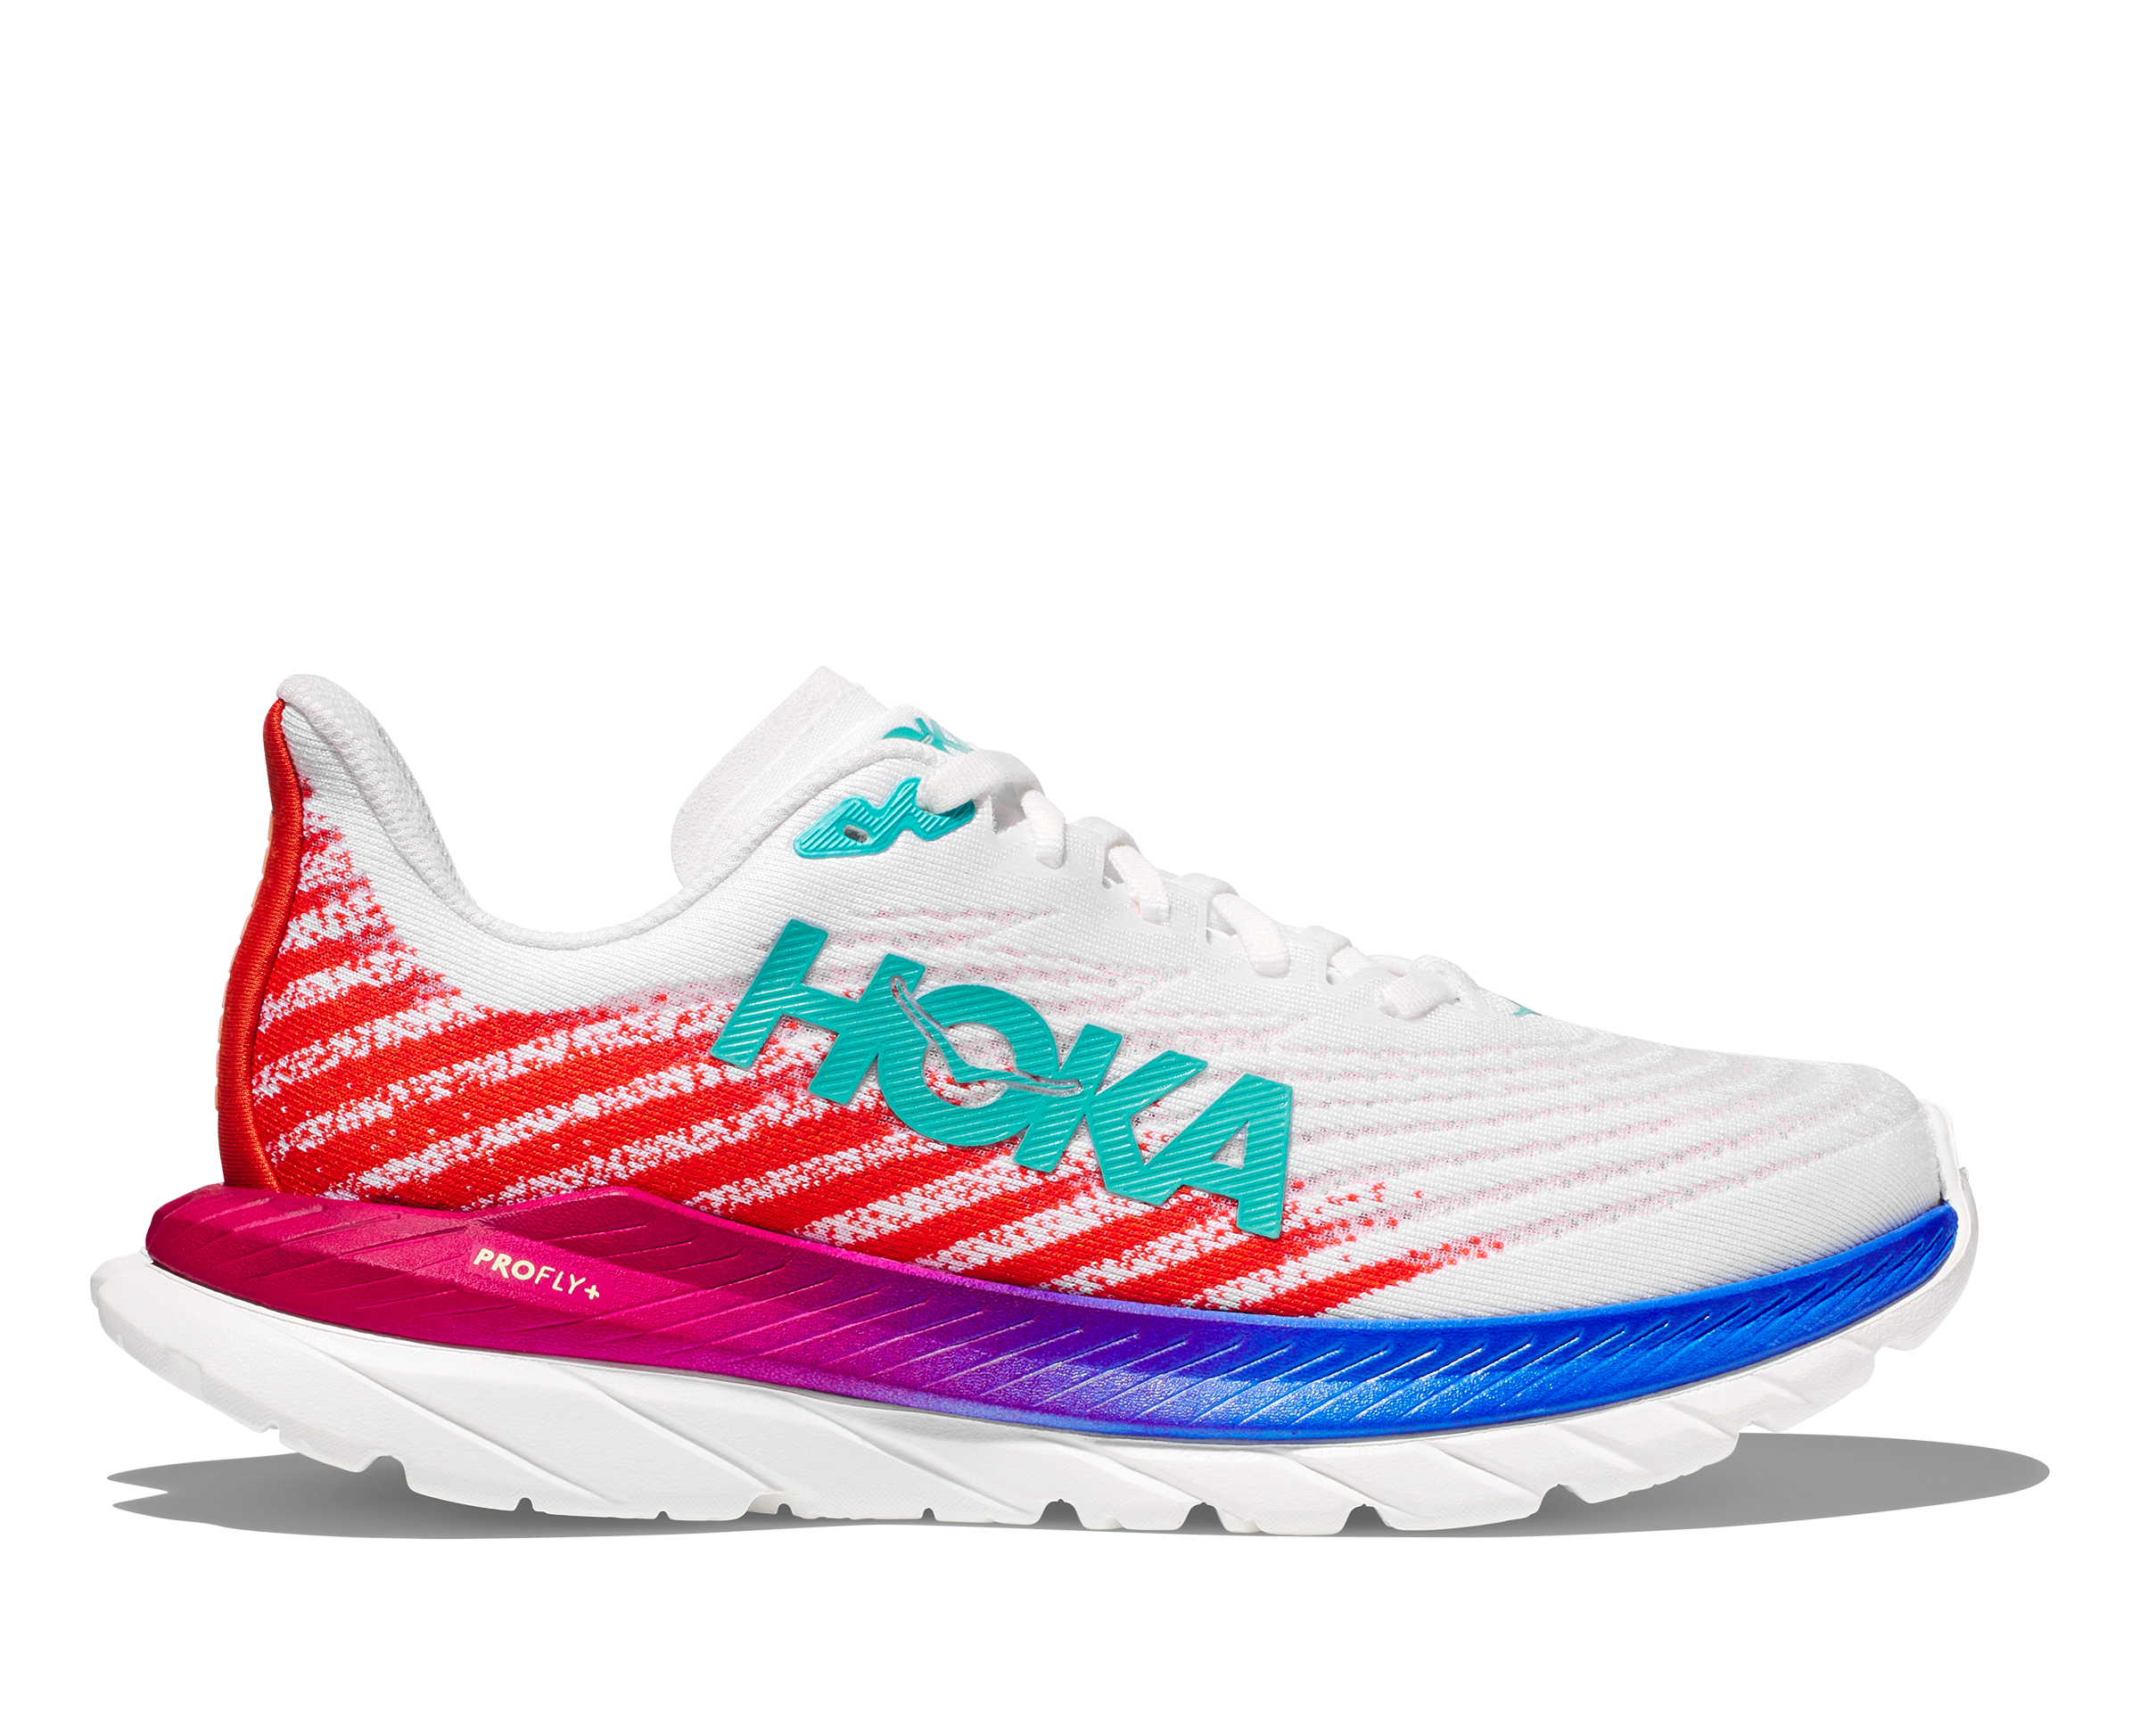 Lateral view of the Women's Mach 5 by HOKA in the color White/Flame